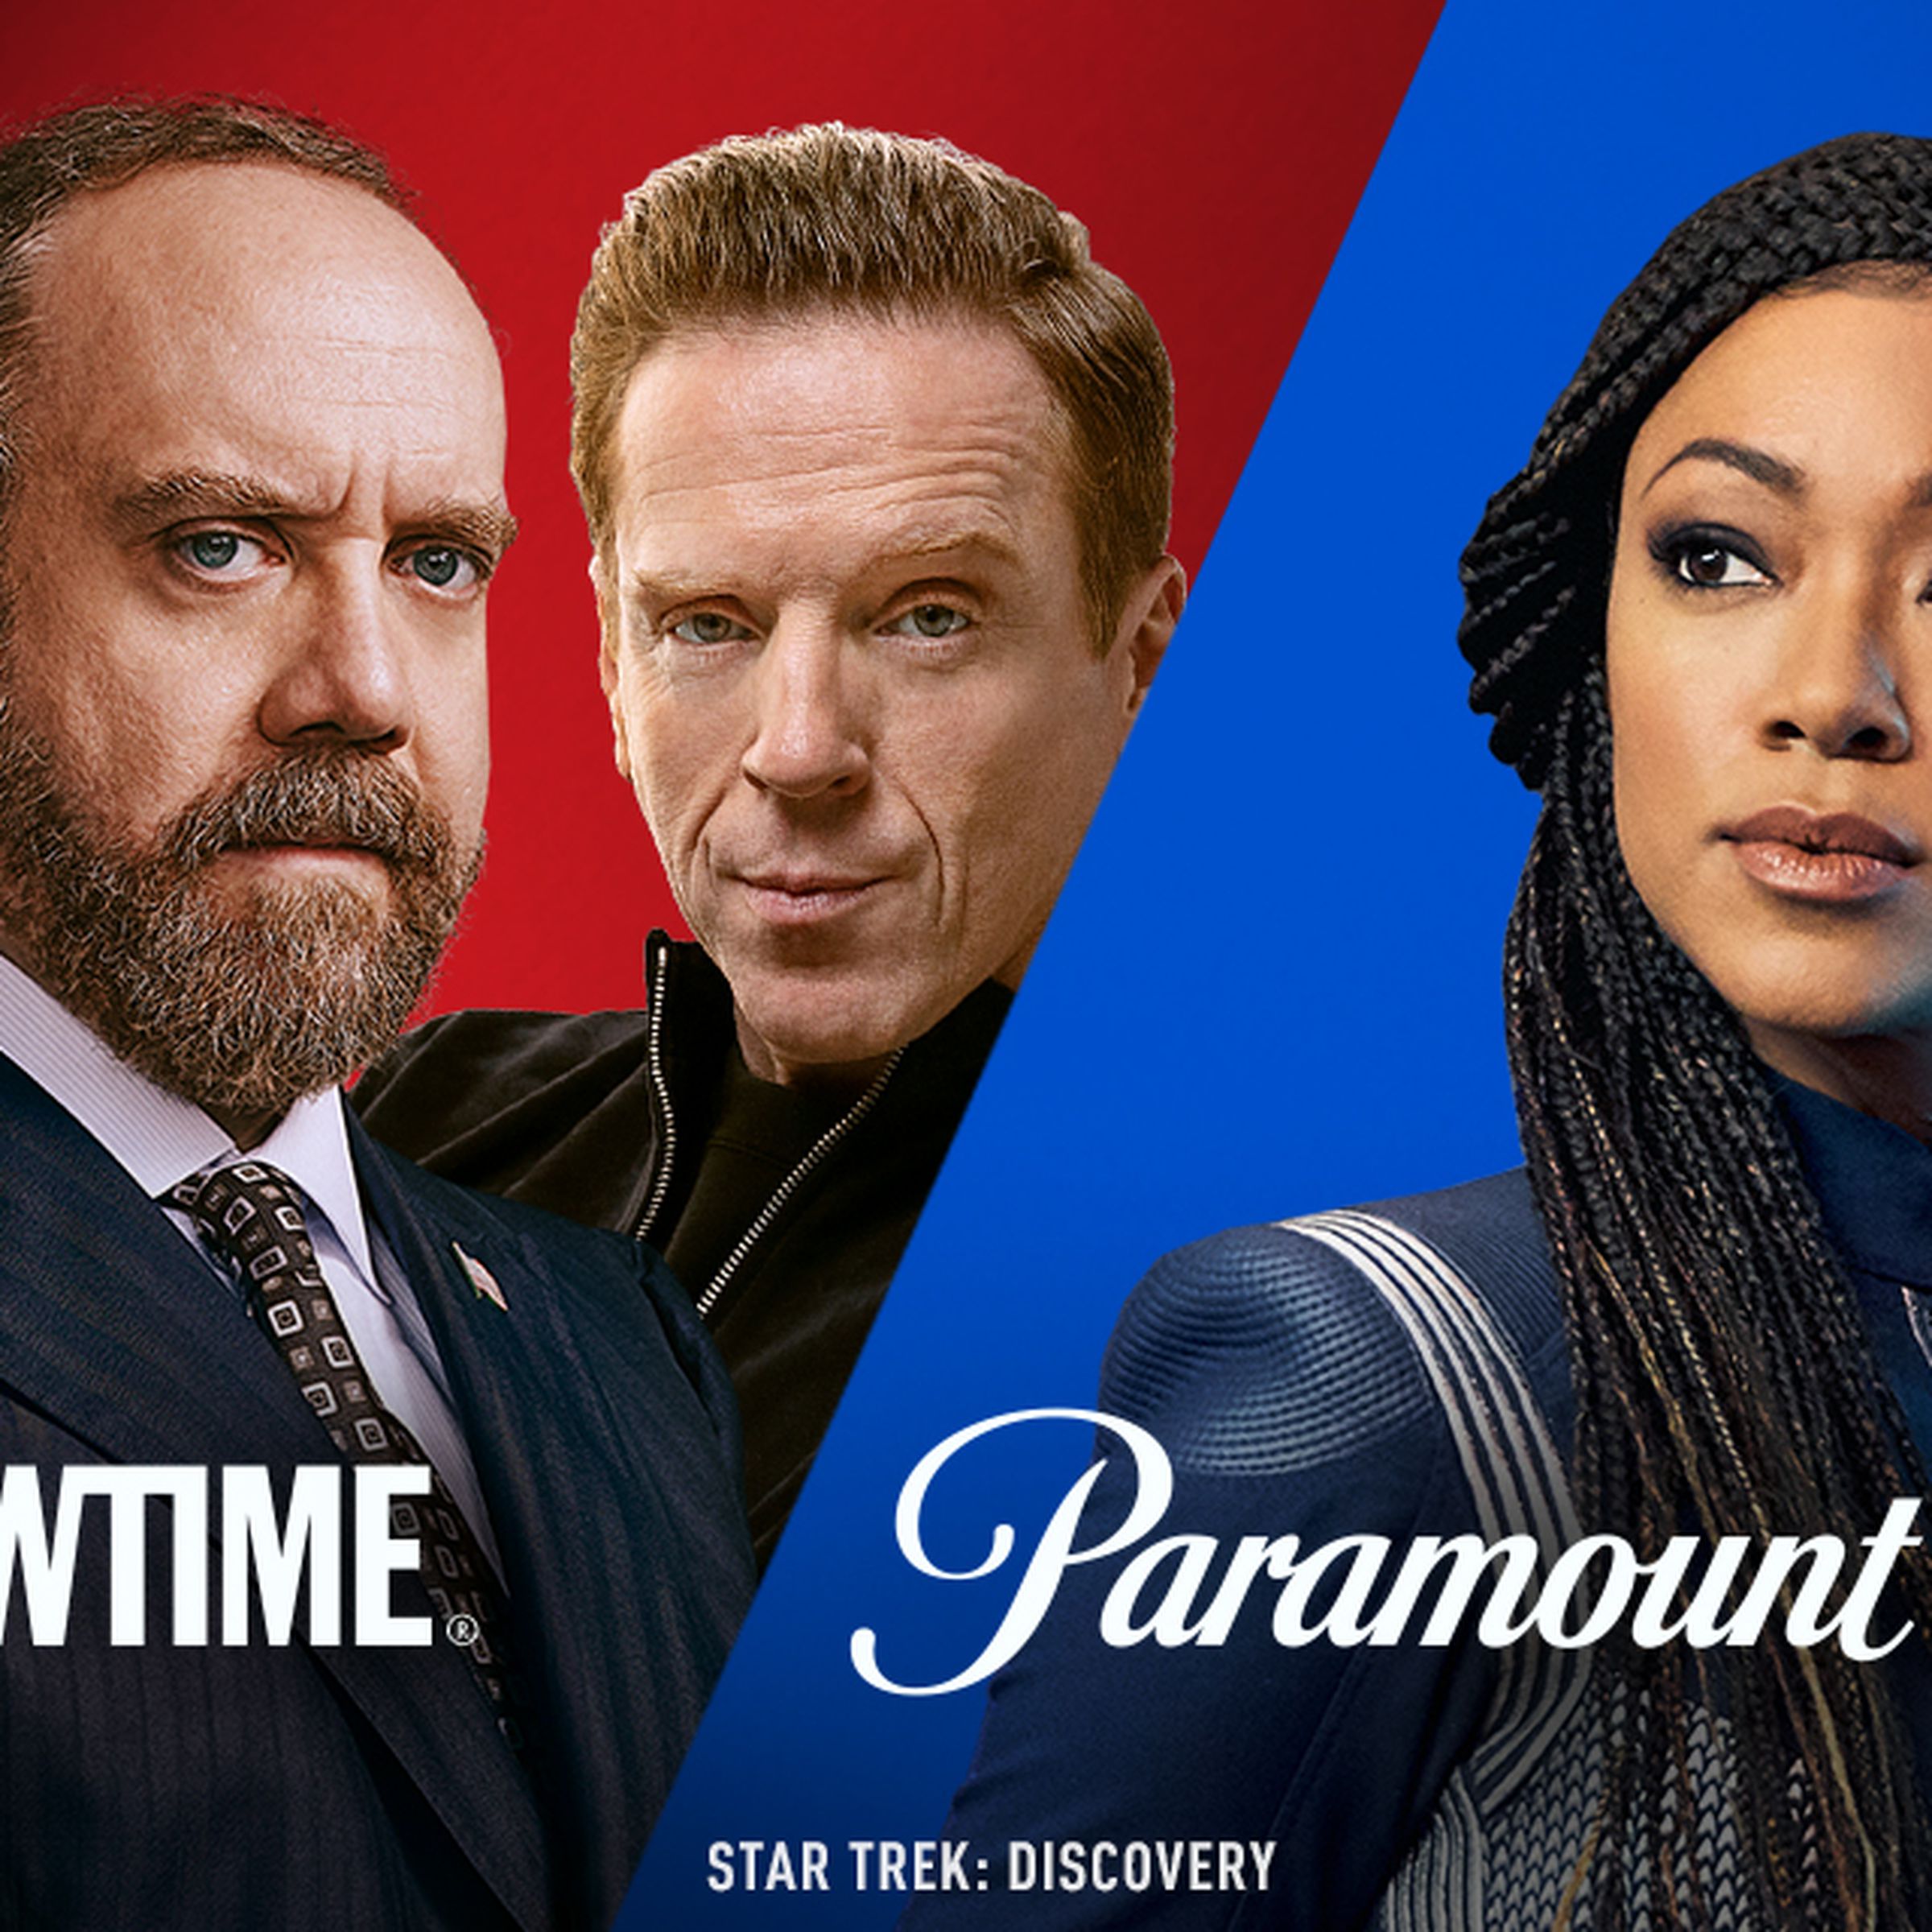 An image of two men from the Showtime show Billionaires with the Showtime logo beneath them on one side of the image. On the other side of the image is a character from Star Trek: Discovery with the Paramount Plus logo beneath her.